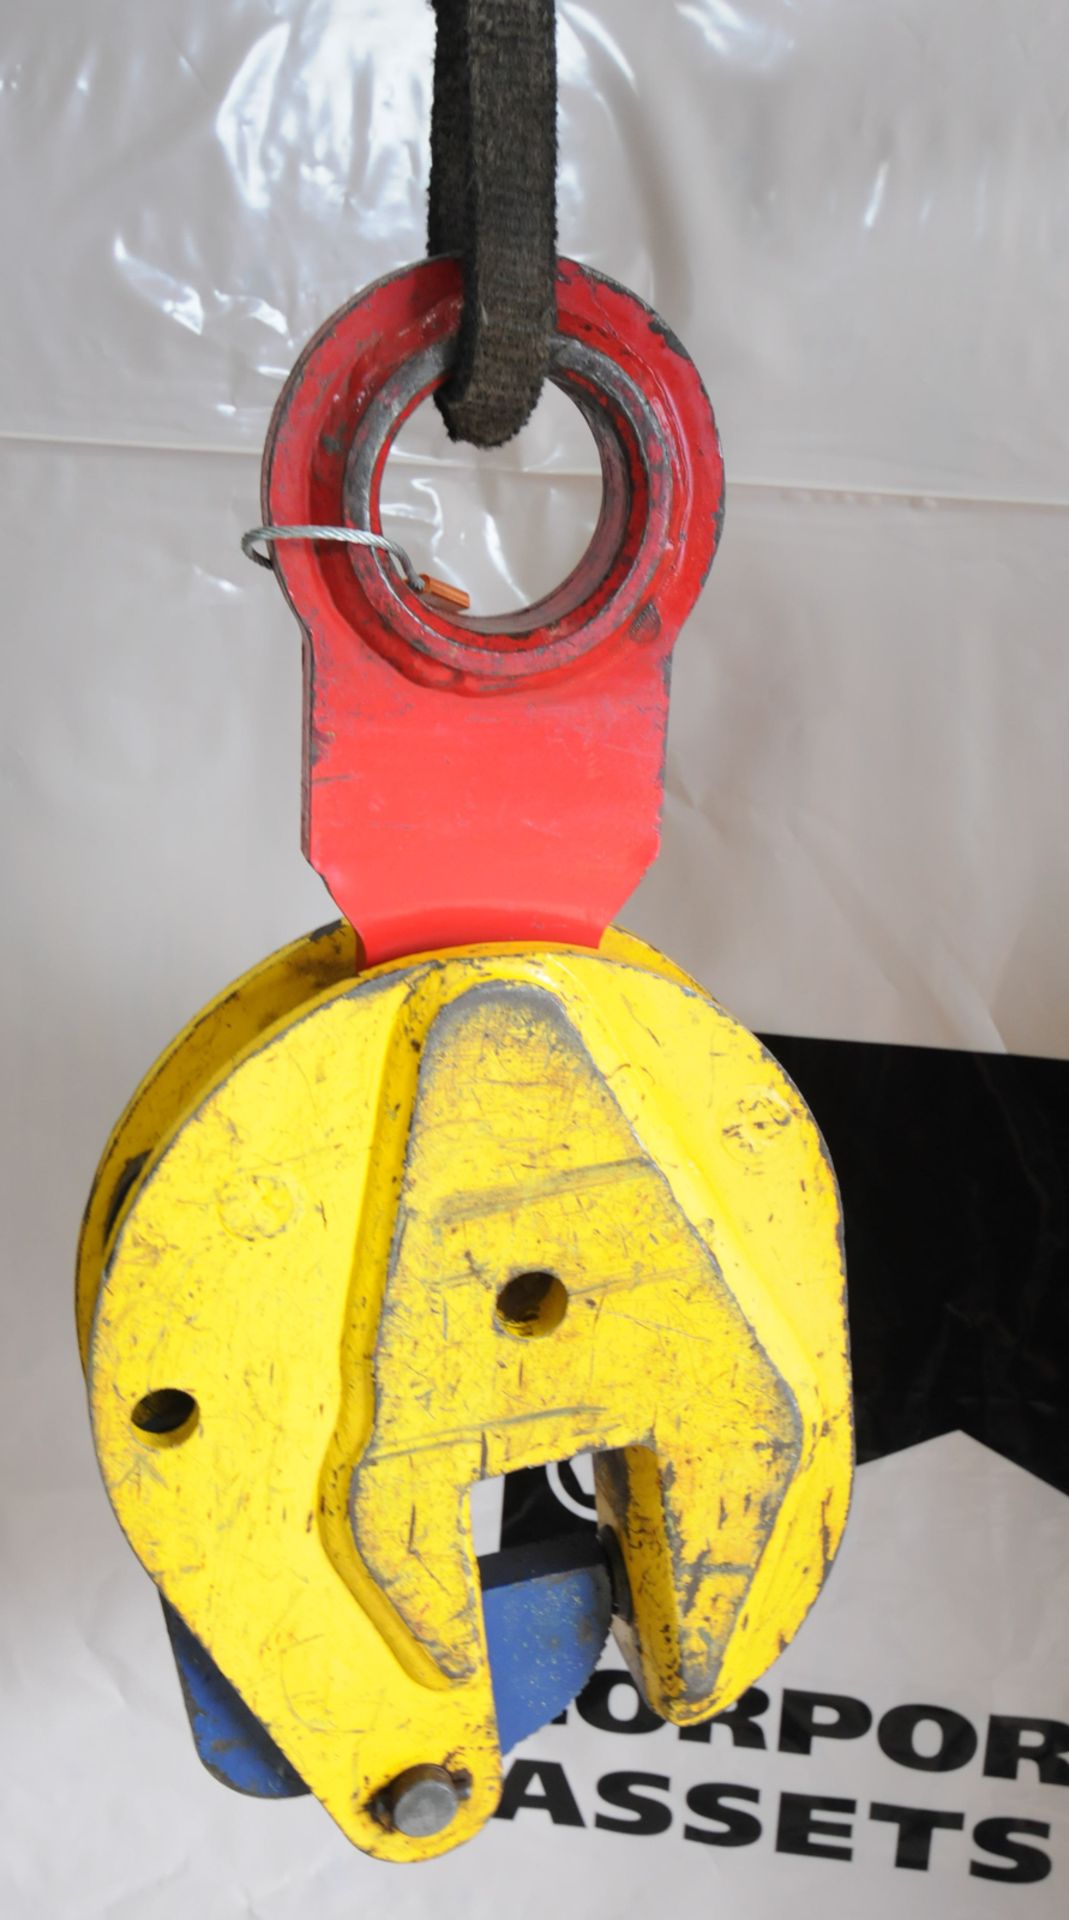 LIFT SAFE 12 TON CAPACITY PLATE LIFTER WITH 2" MAX. CAPACITY - Image 2 of 2